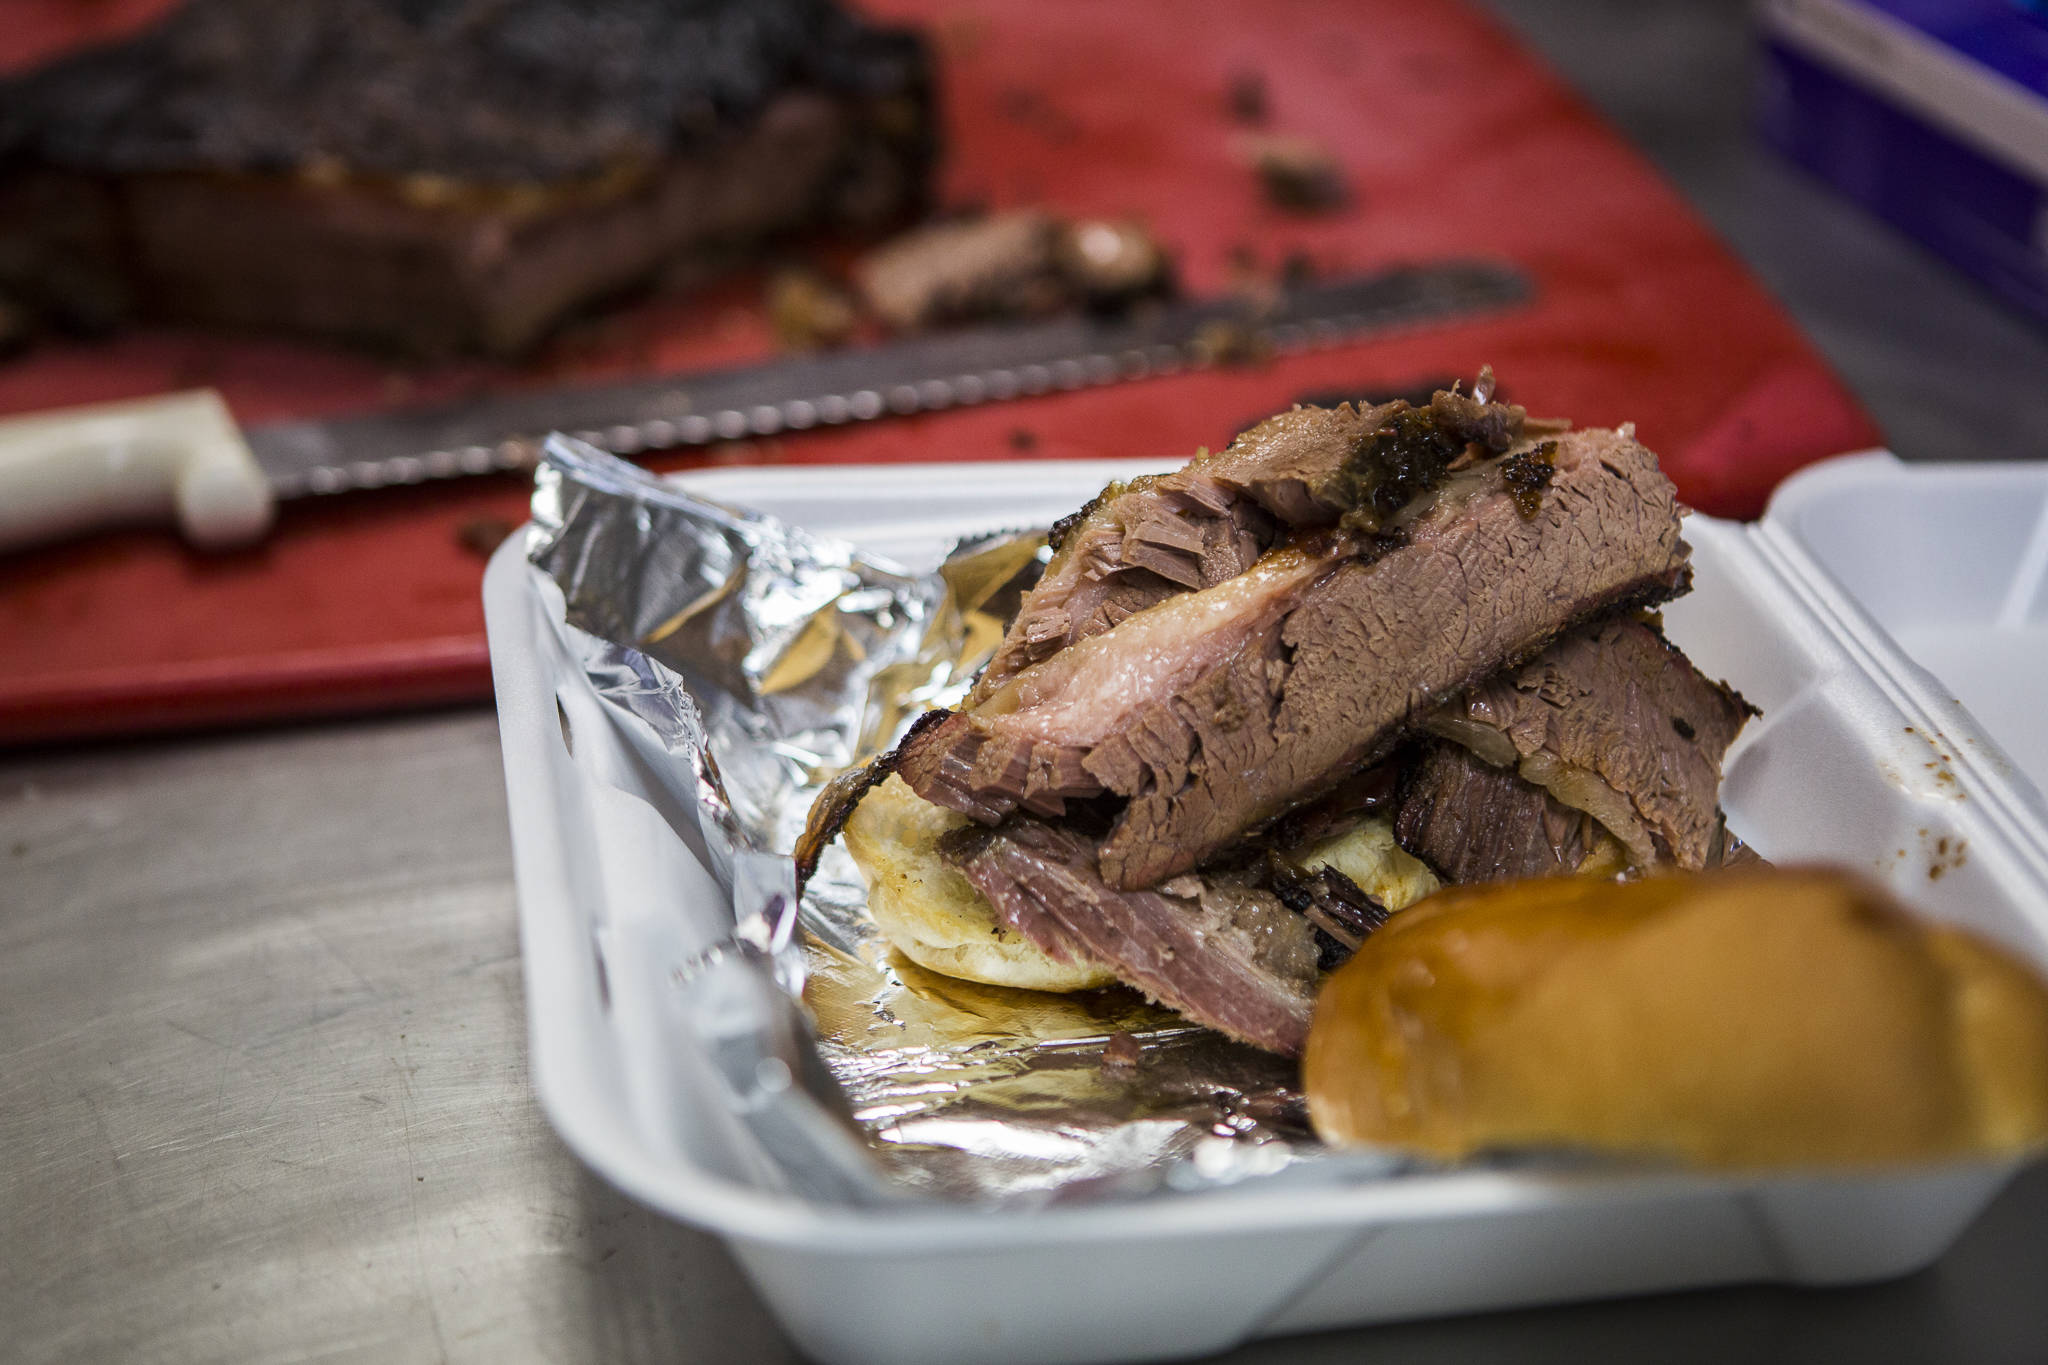 A brisket sandwich is ready for pick-up at Carolina Smoke in Bothell. Olivia Vanni/staff photo